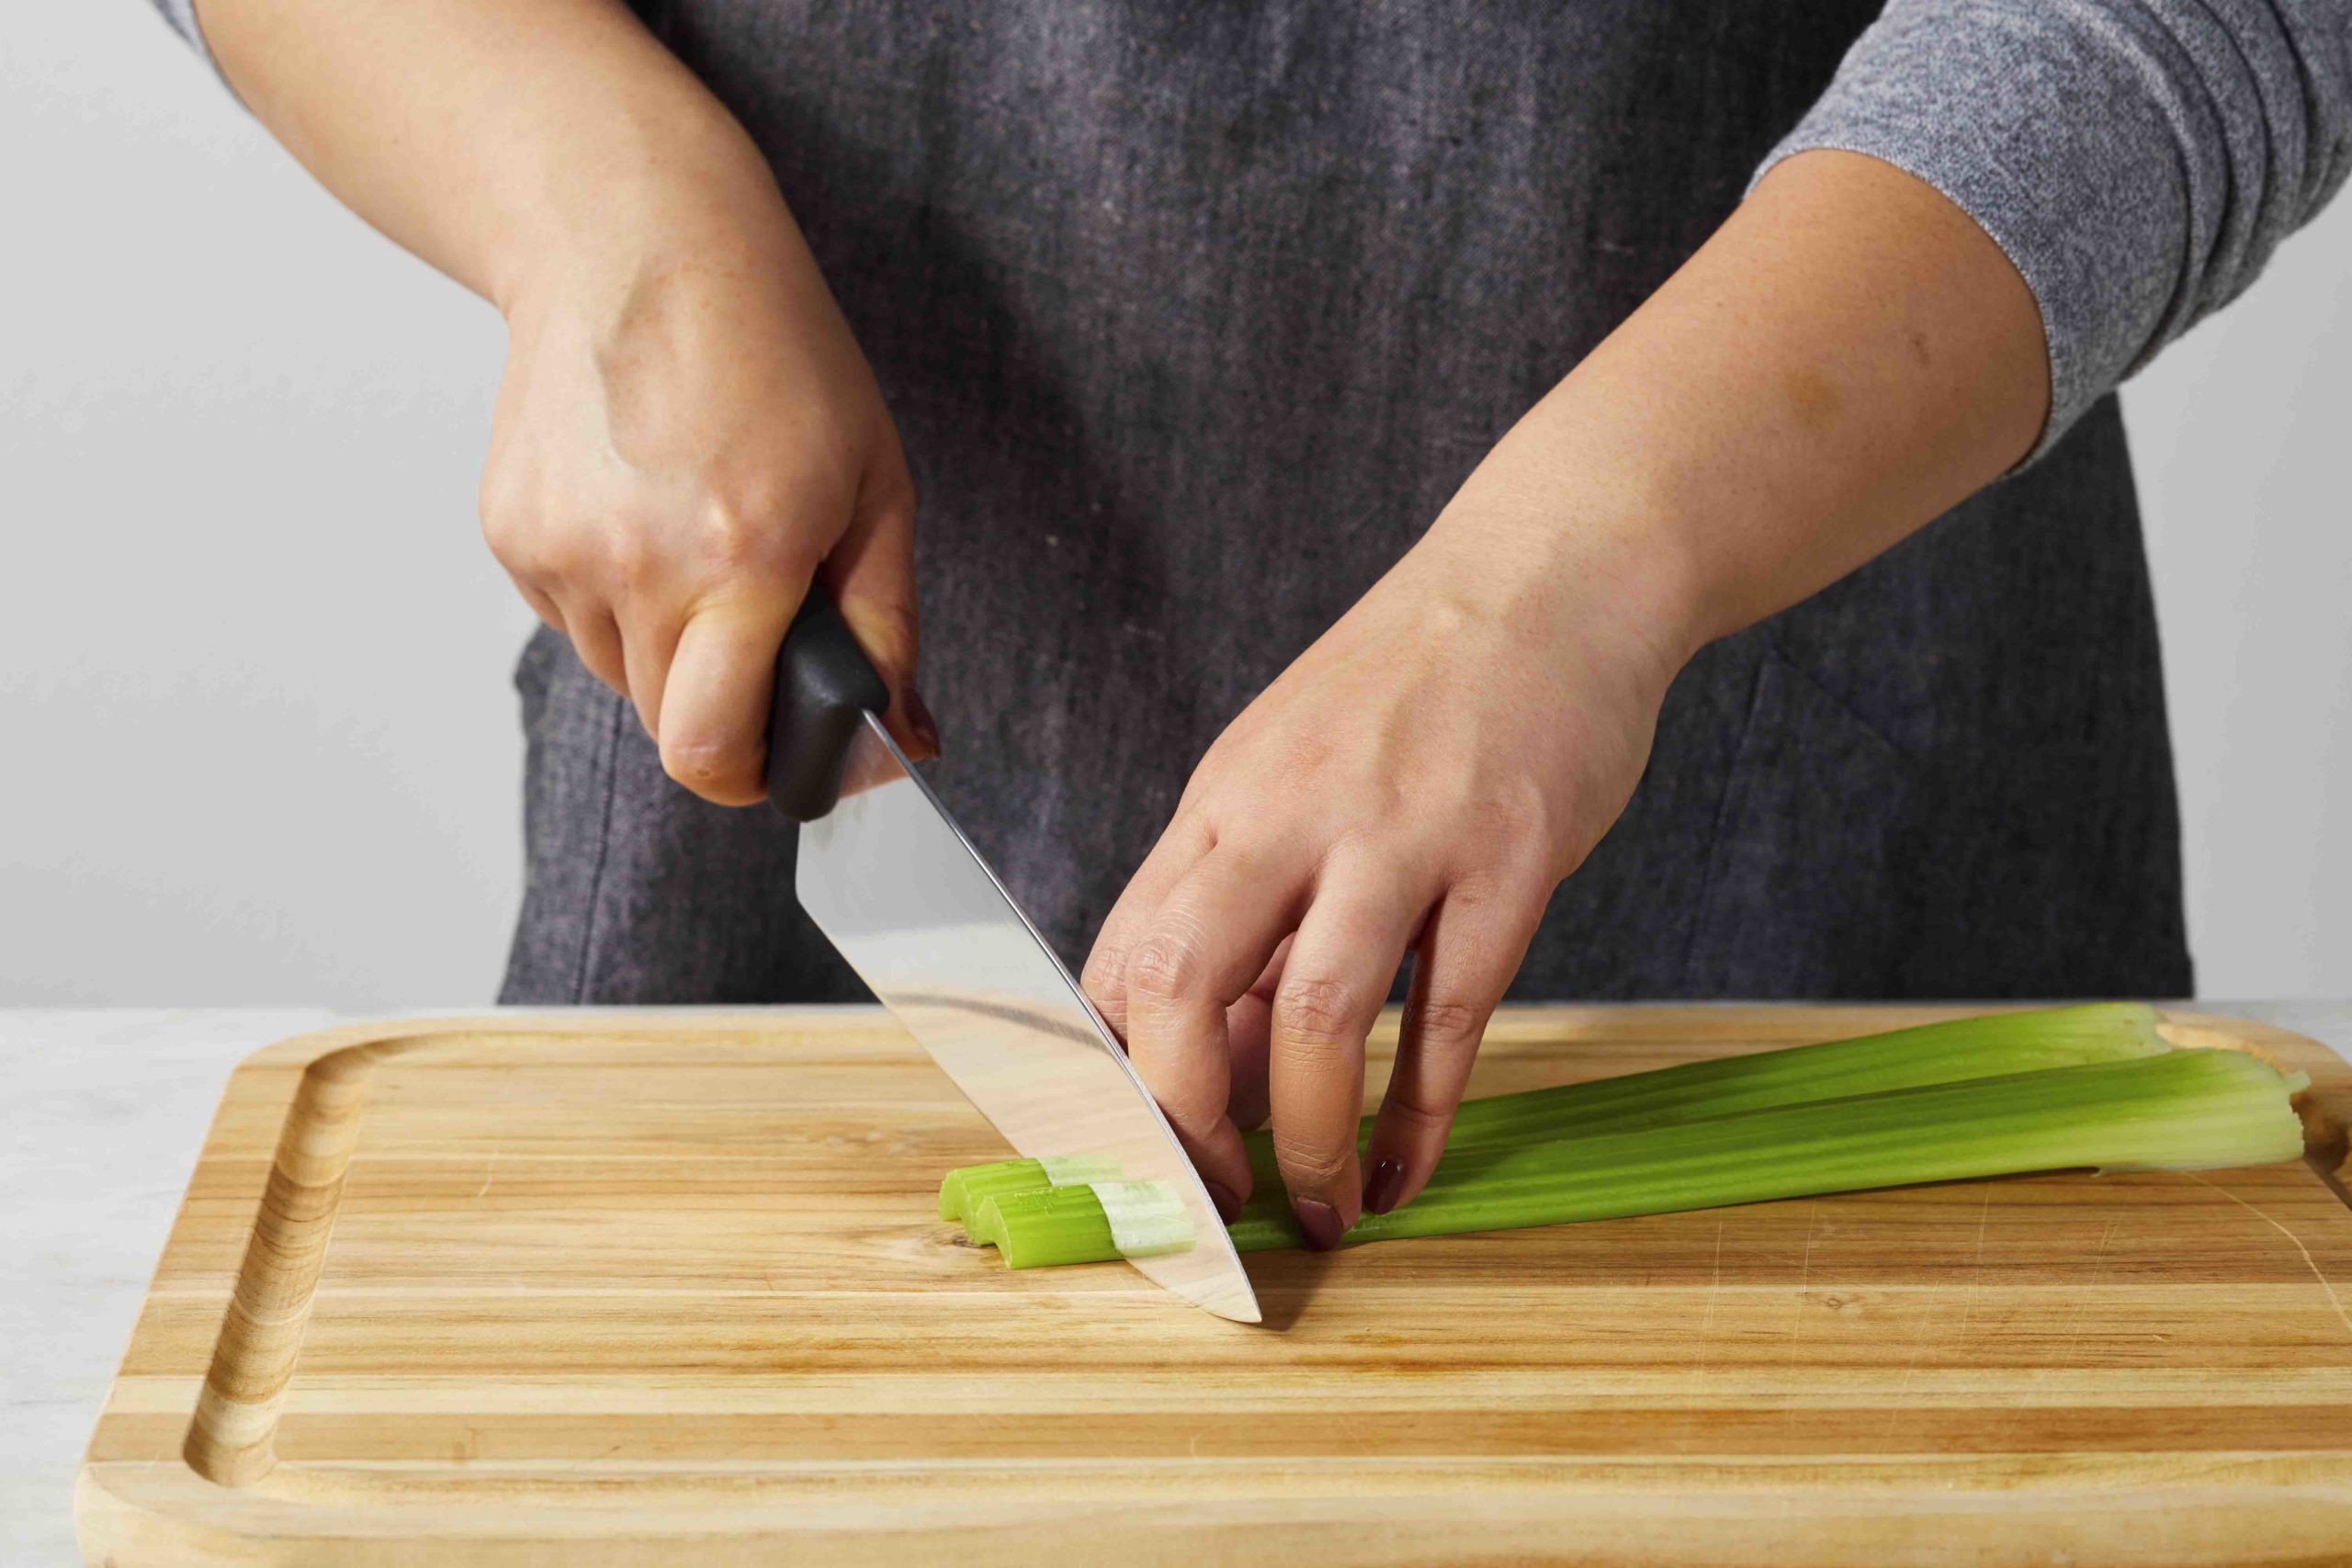 Knife Skills for Beginners: A Visual Guide to Slicing, Dicing, and